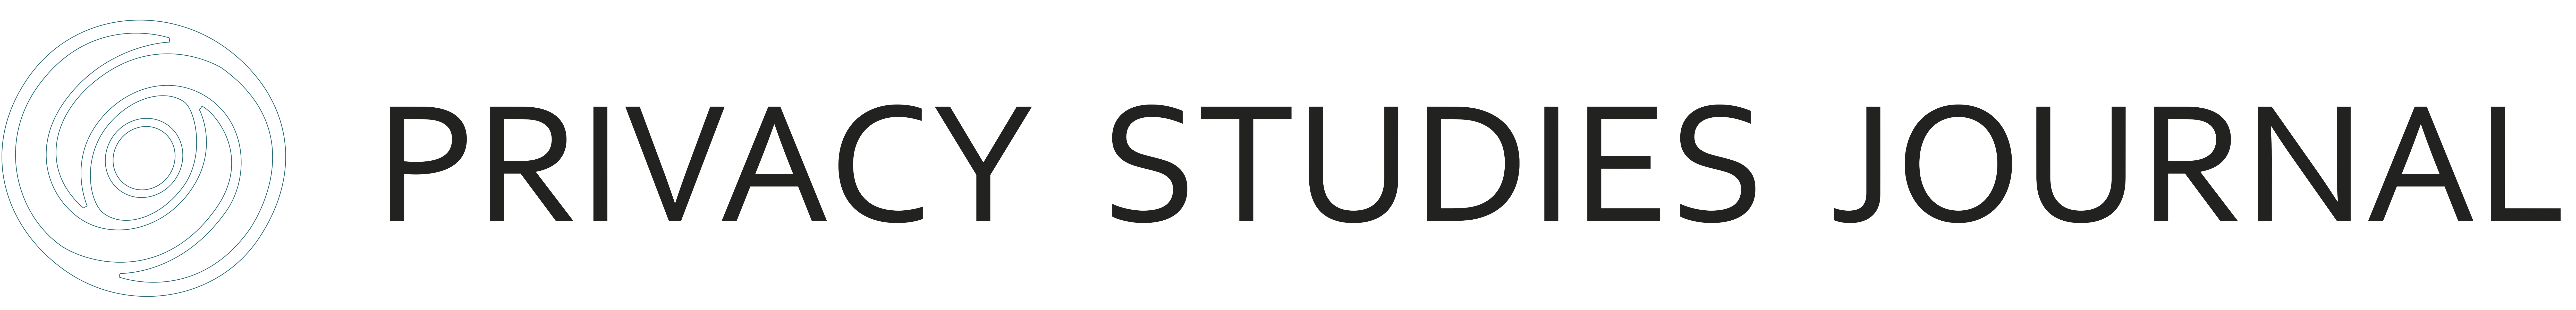 Privacy Studies Journal Logo consisting of a stilyzed eye in a light blue color